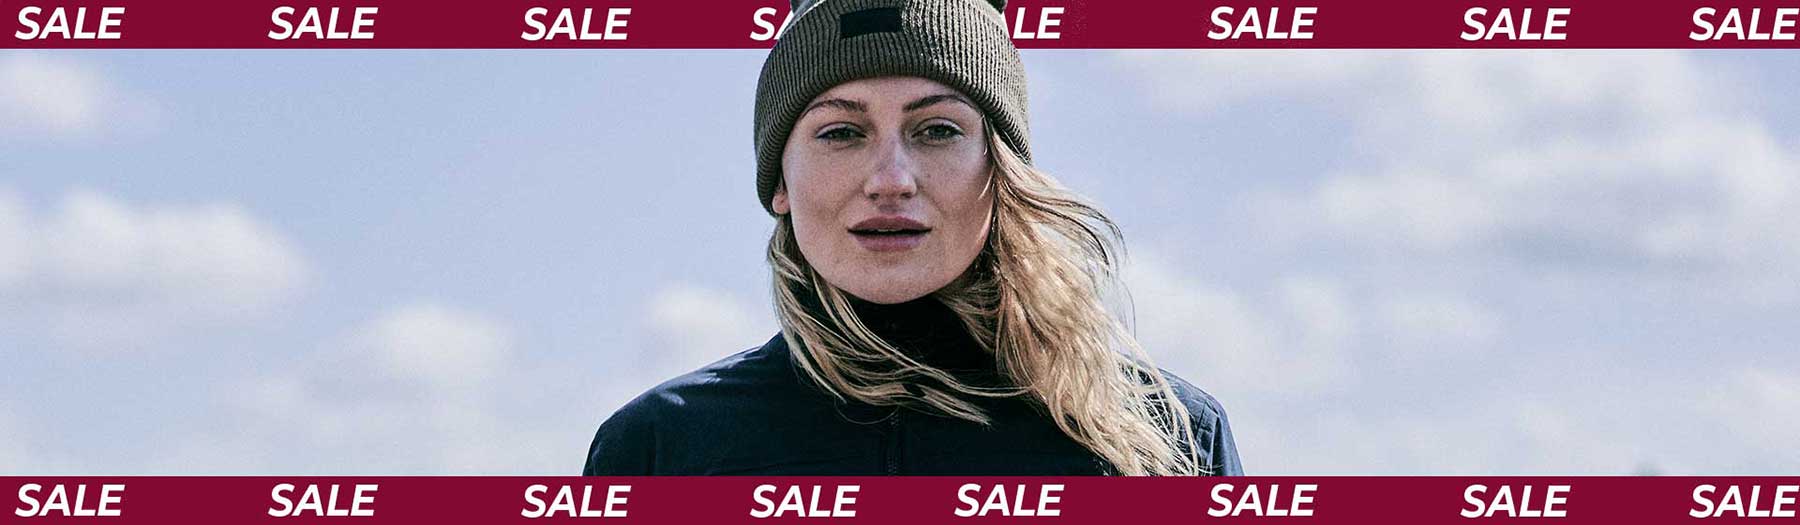 Women's Country Clothing Sale at Hollands